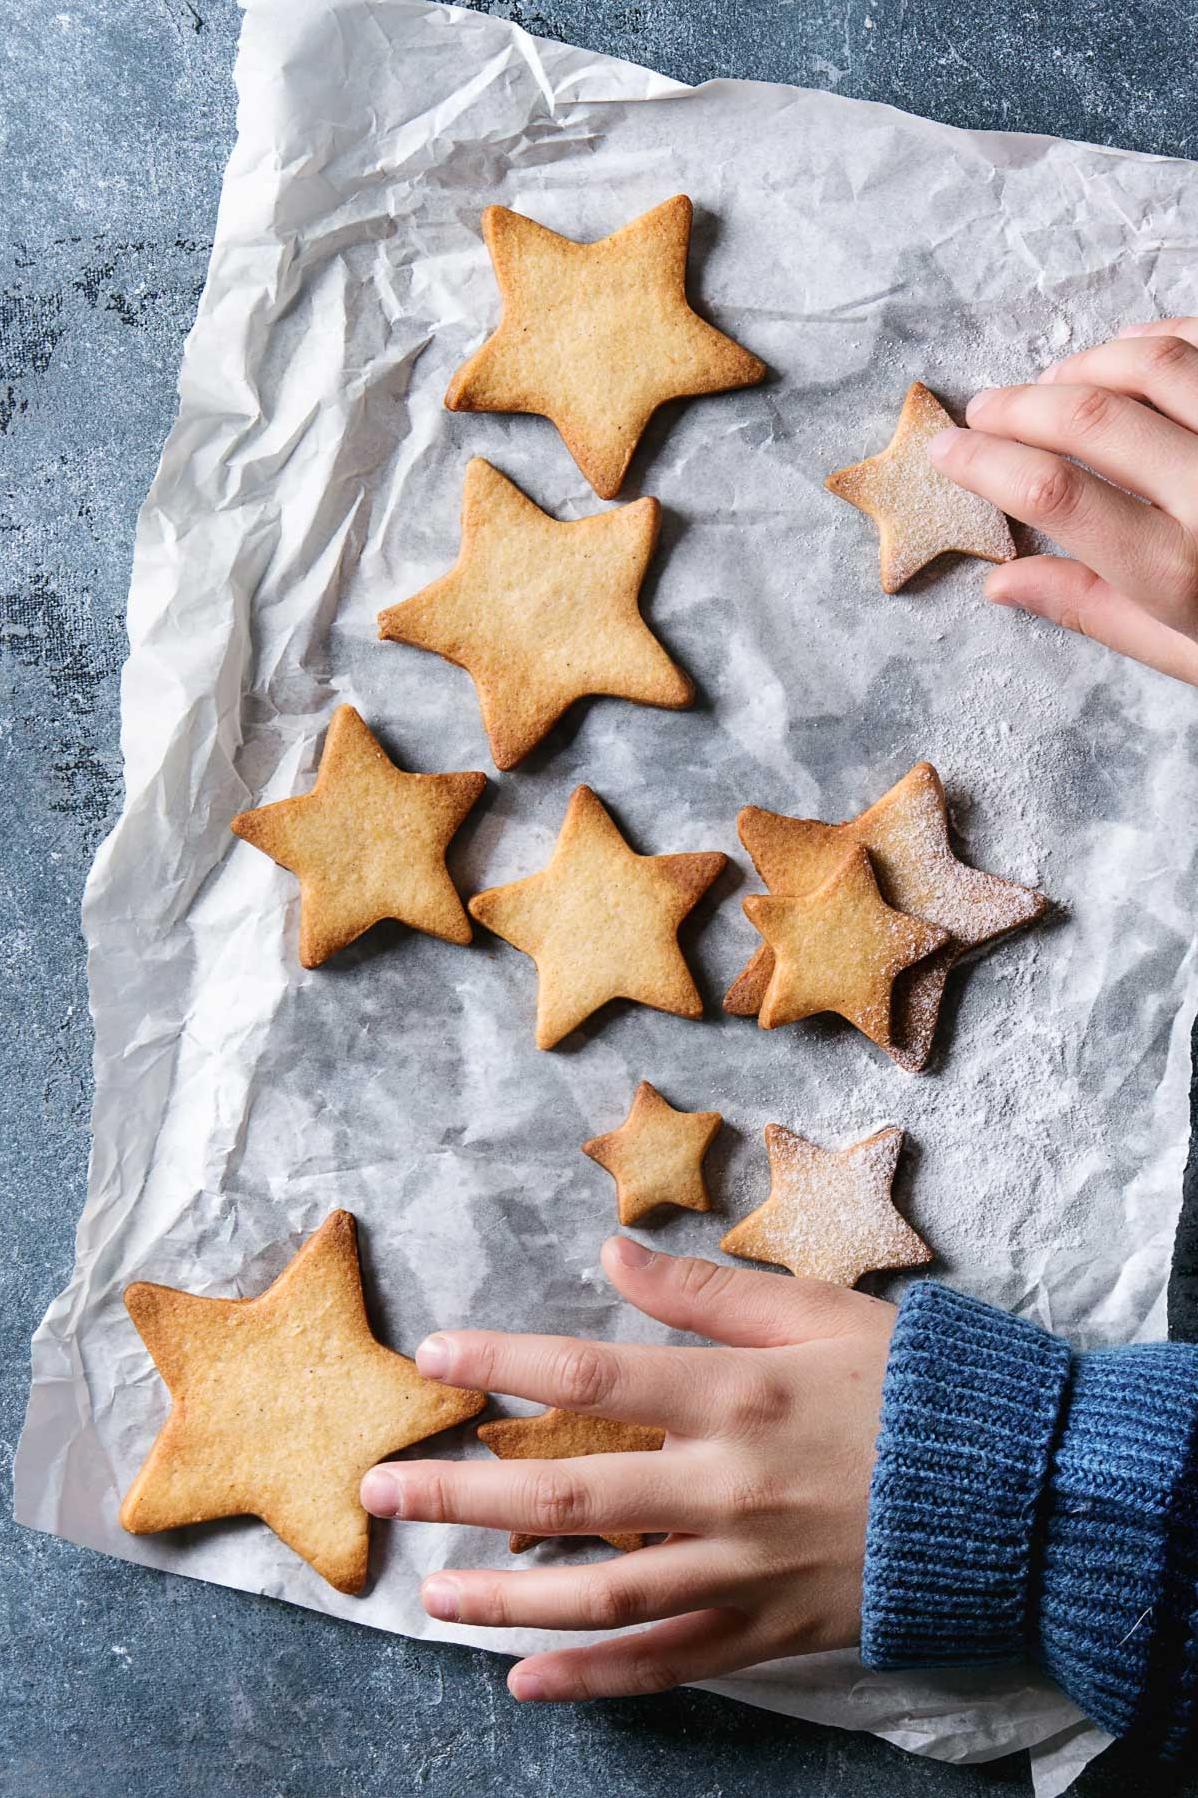  Enjoy a snack of the stars with these gluten-free cookies.